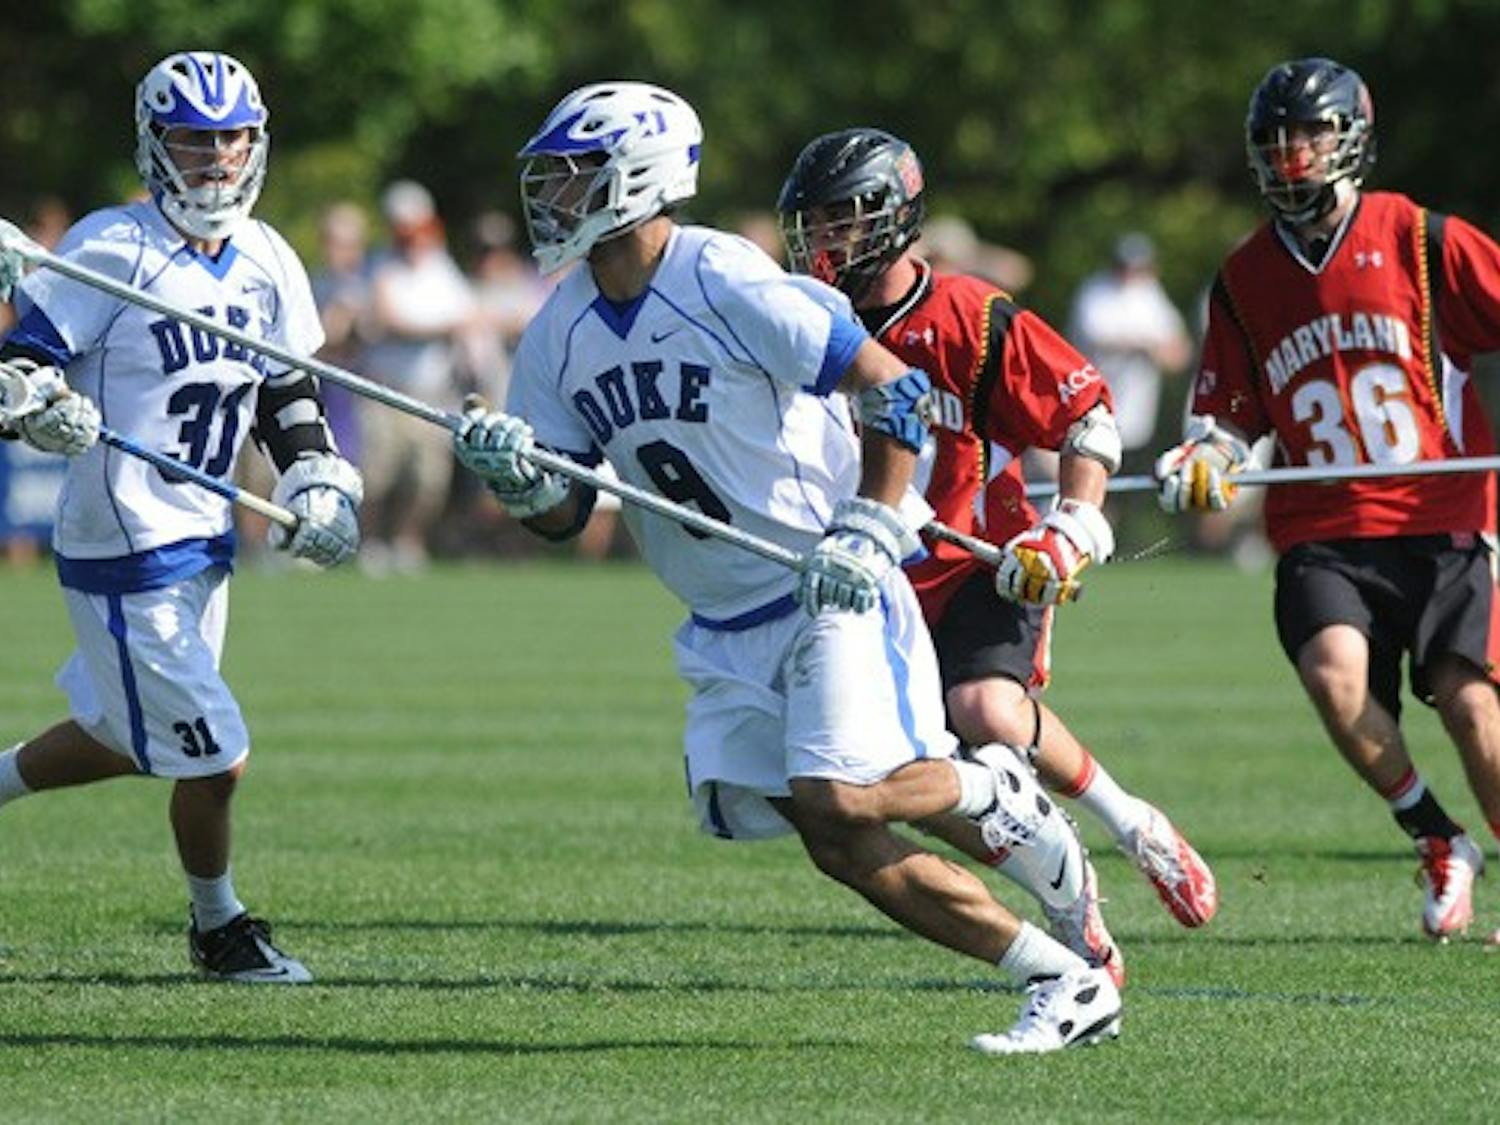 Duke’s performance at the X was a cause for concern Sunday, with the Blue Devils losing 18 of their 24 faceoffs.